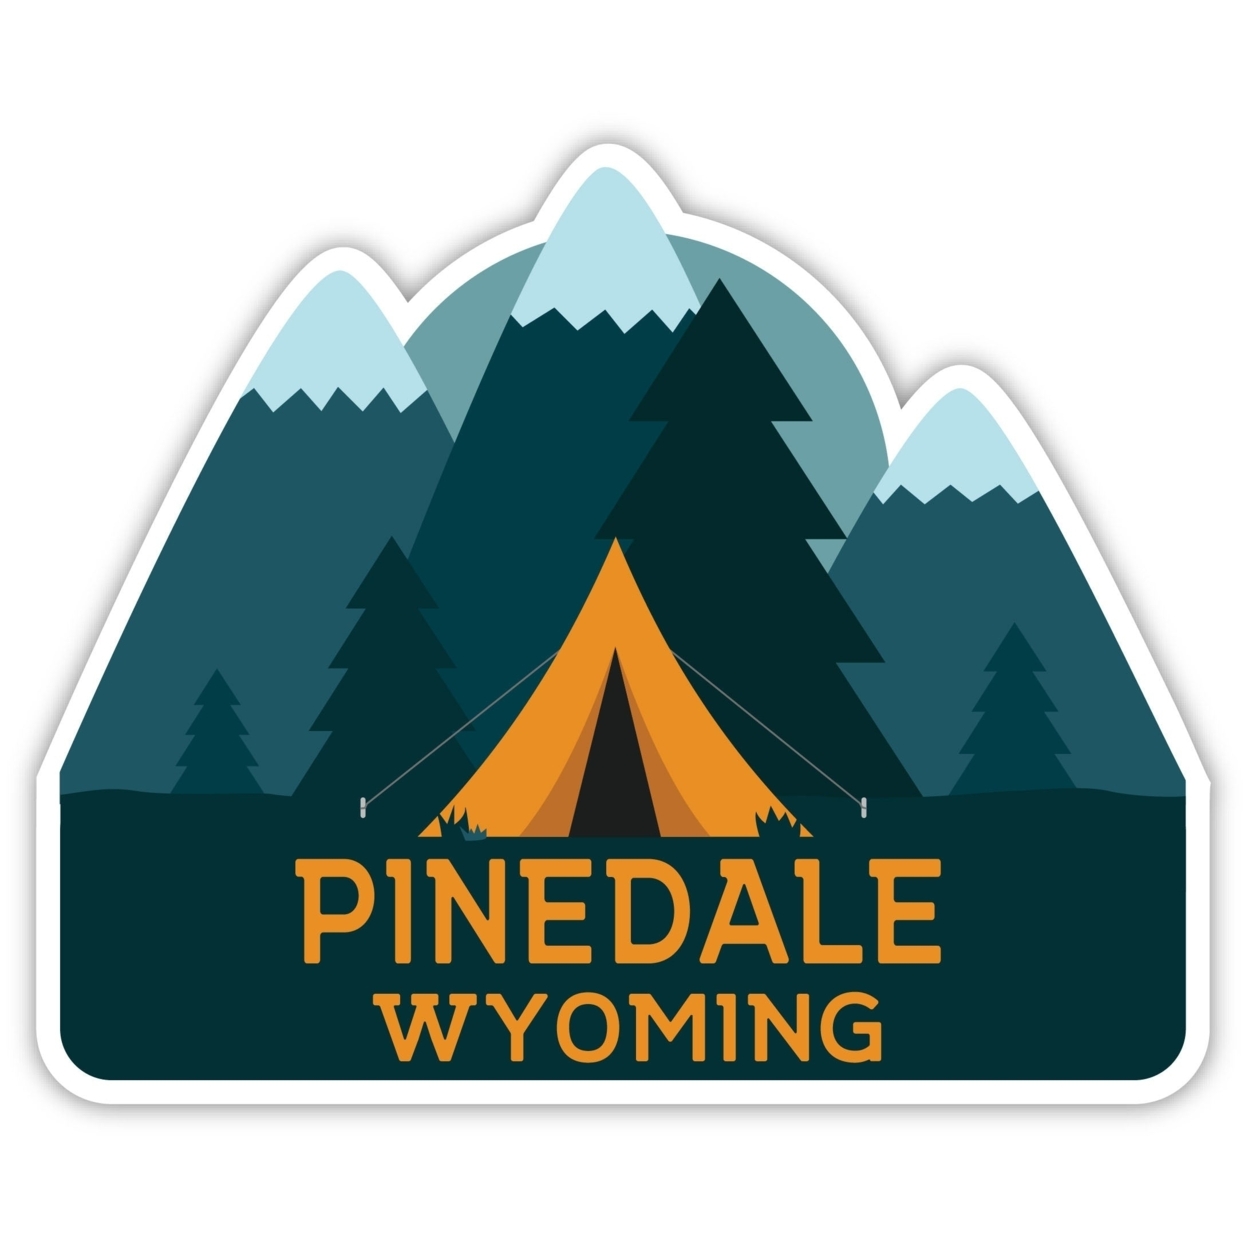 Pinedale Wyoming Souvenir Decorative Stickers (Choose Theme And Size) - Single Unit, 2-Inch, Great Outdoors